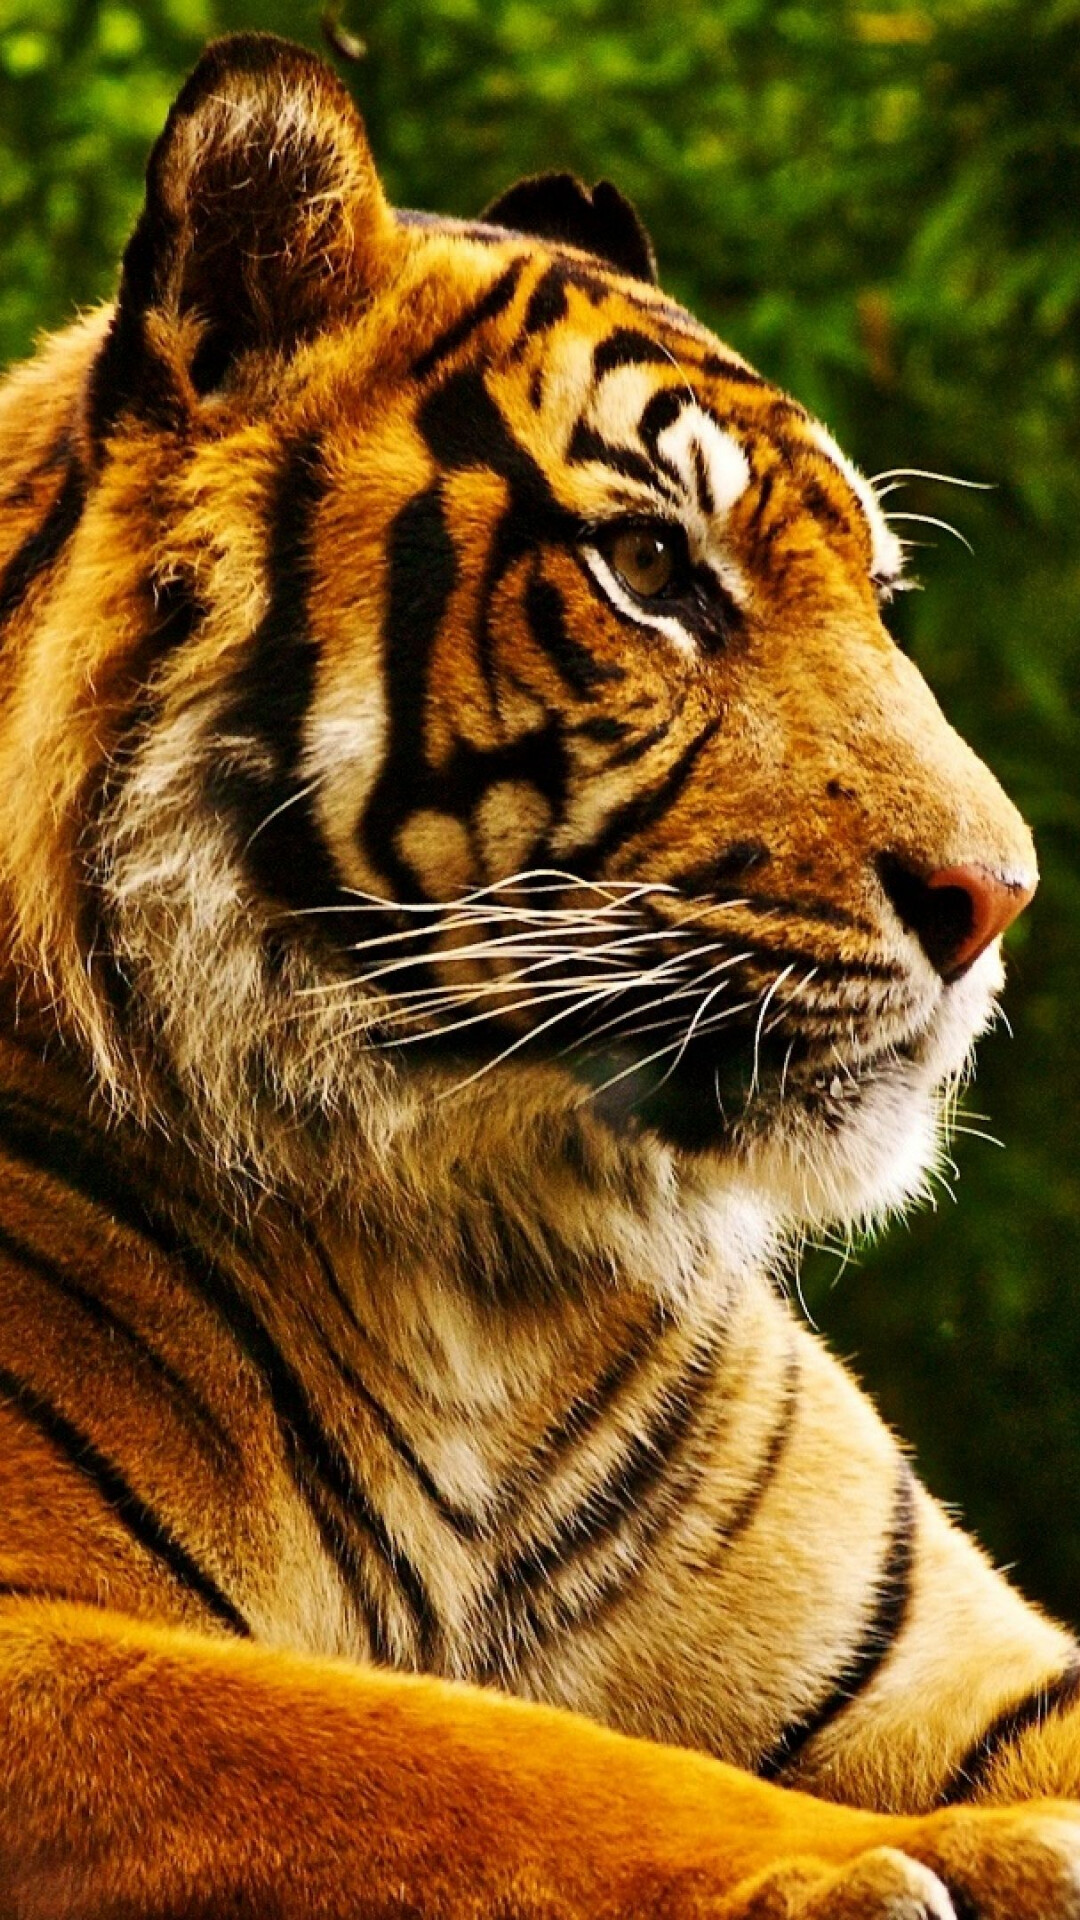 Resting Tiger Wallpaper, Tranquil atmosphere, Peaceful repose, Serene beauty, 1080x1920 Full HD Phone